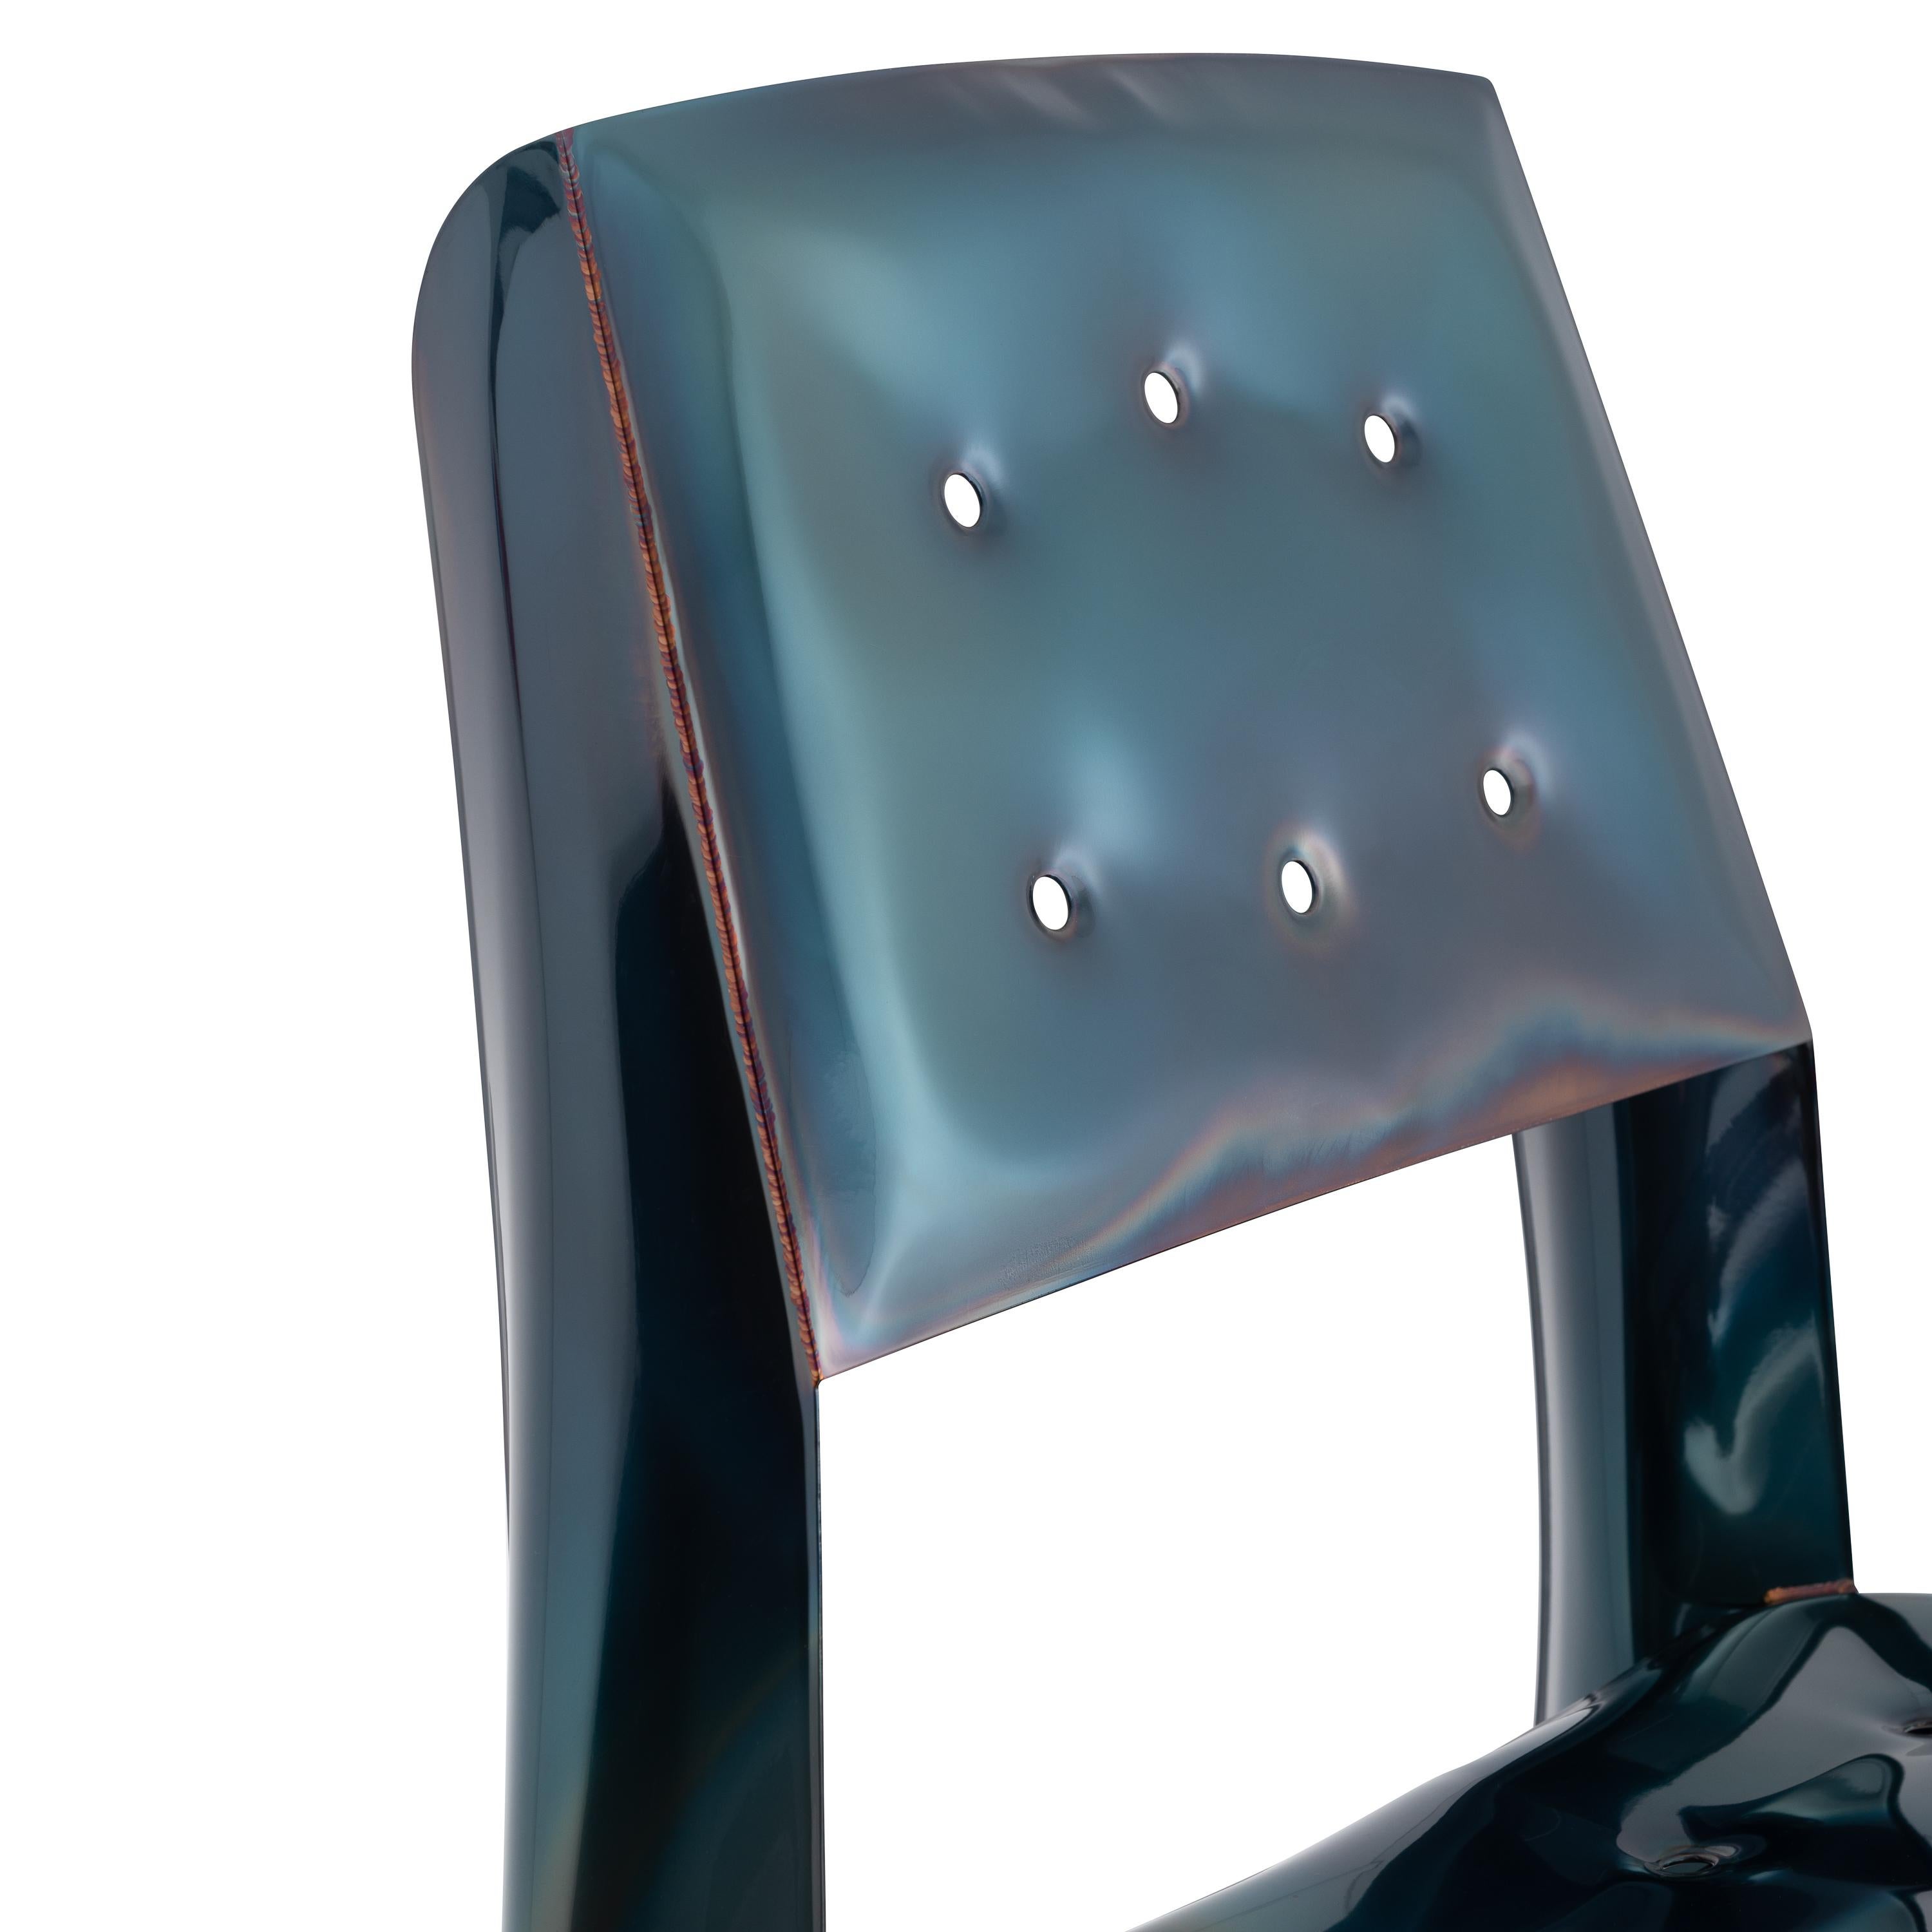 Cosmic Blue Chippensteel 0.5 Sculptural Chair by Zieta In New Condition For Sale In Geneve, CH